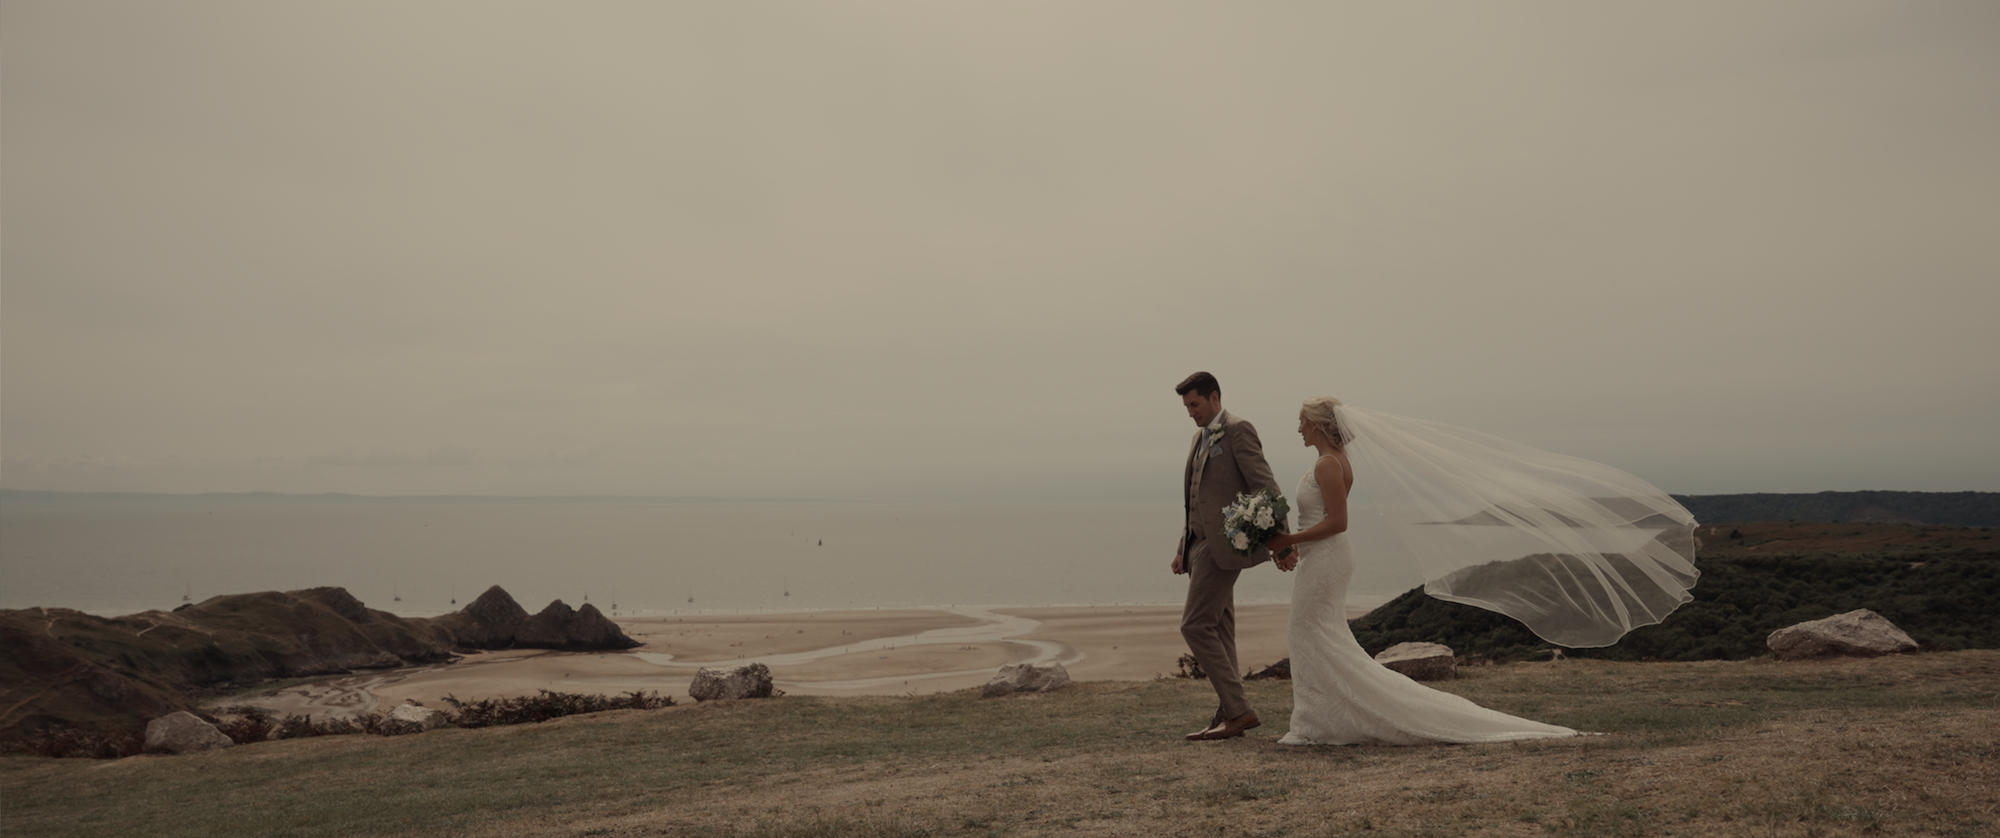 Oxwich Bay Hotel Wedding Videography by Ben Holbrook Films (Swansea South Wales).jpeg26.png